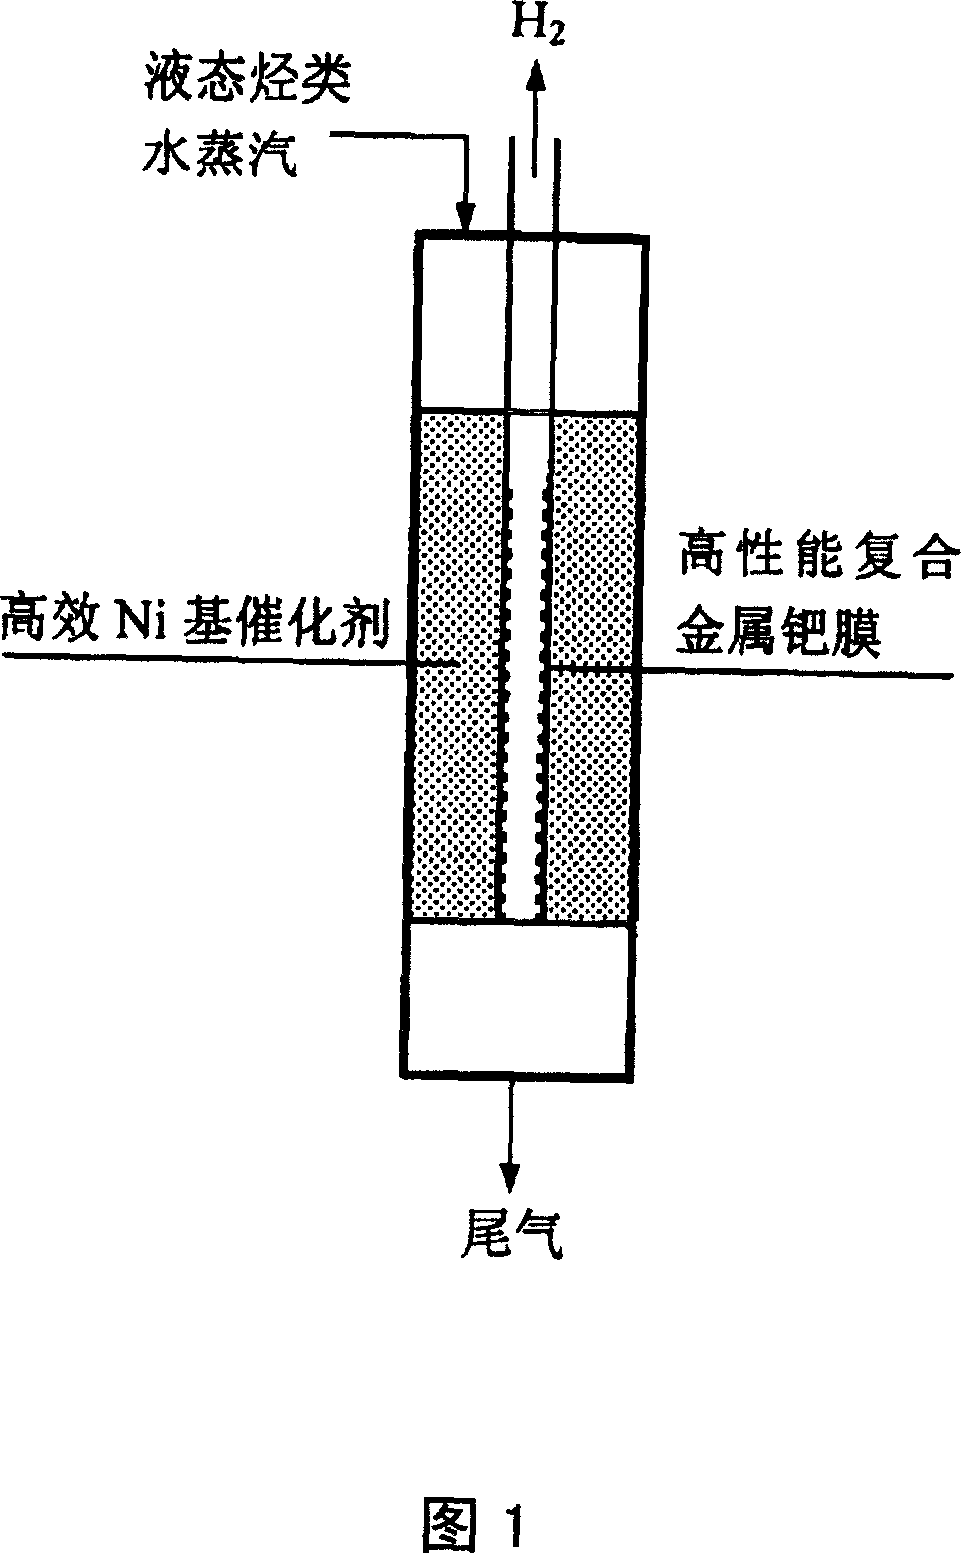 Process of preparing high purity hydrogen with liquid hydrocarbon in a palladium film reactor